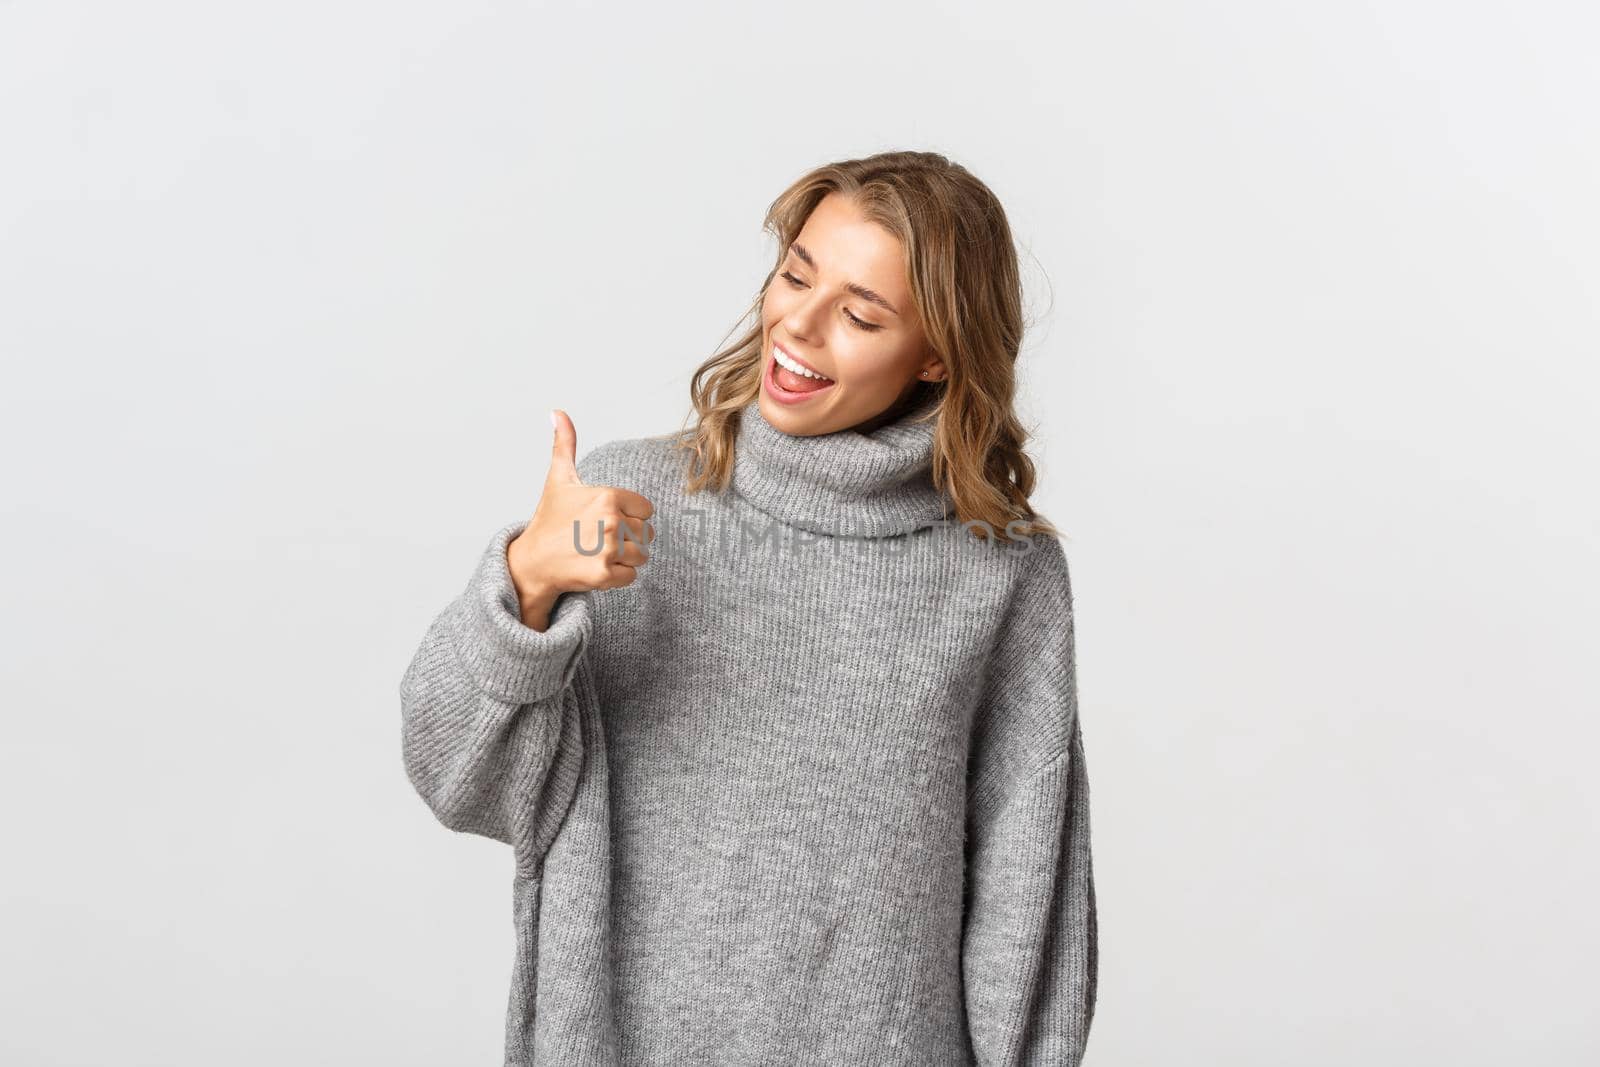 Portrait of cute blond girl in grey sweater, looking at her thumb-up and smiling, standing over white background.